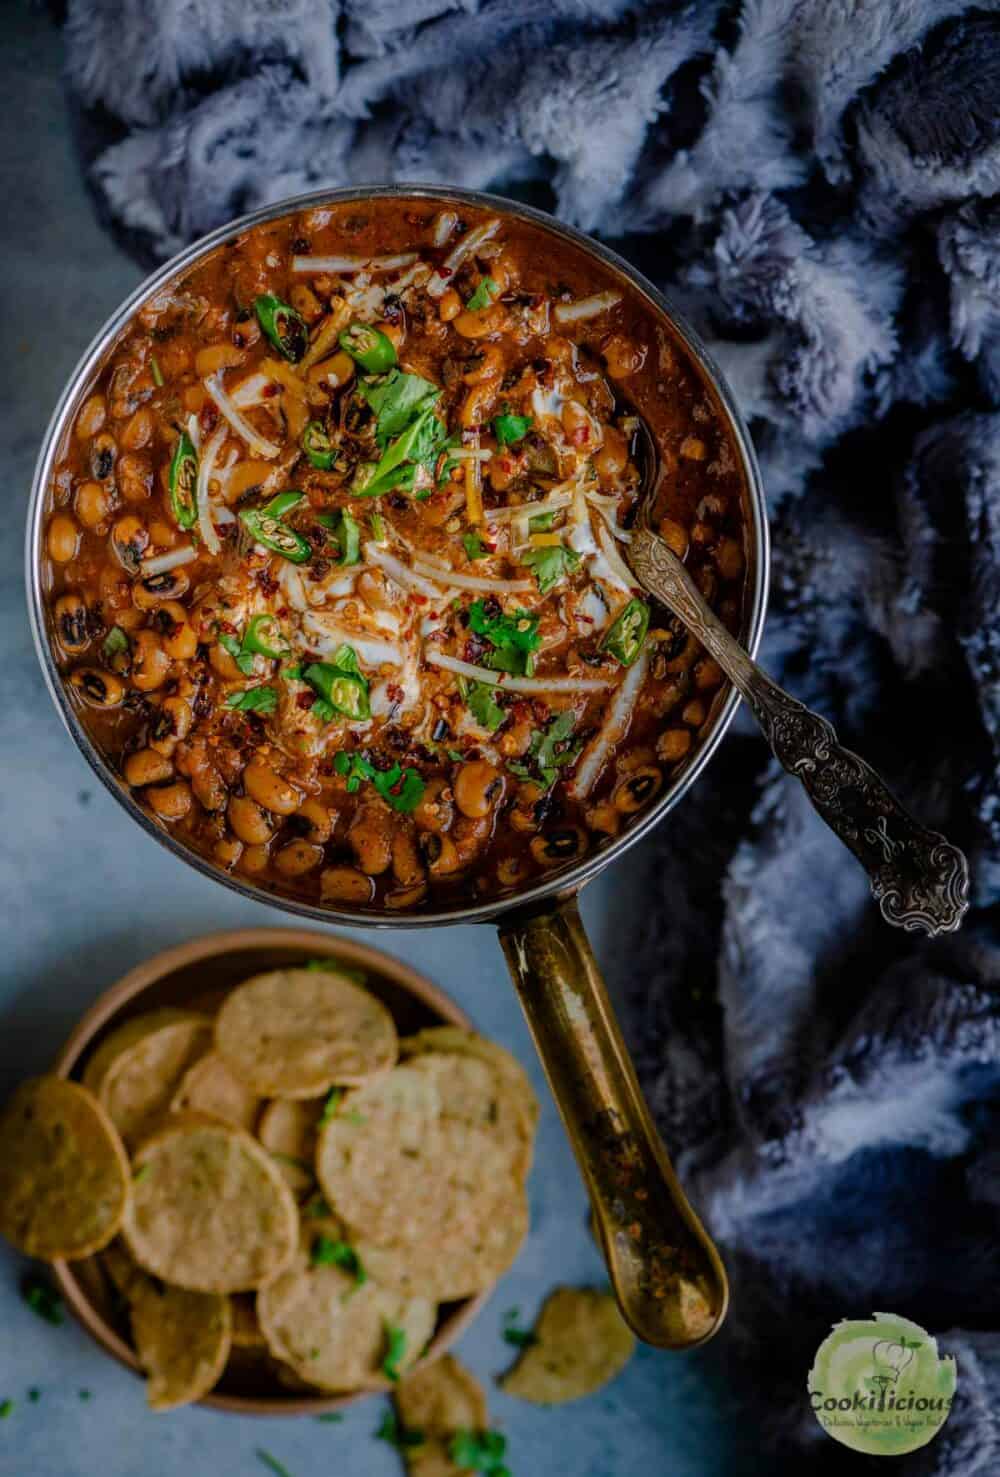 Instant Pot Black-Eyed Peas Vegan Chili served with some tortilla chips on the side